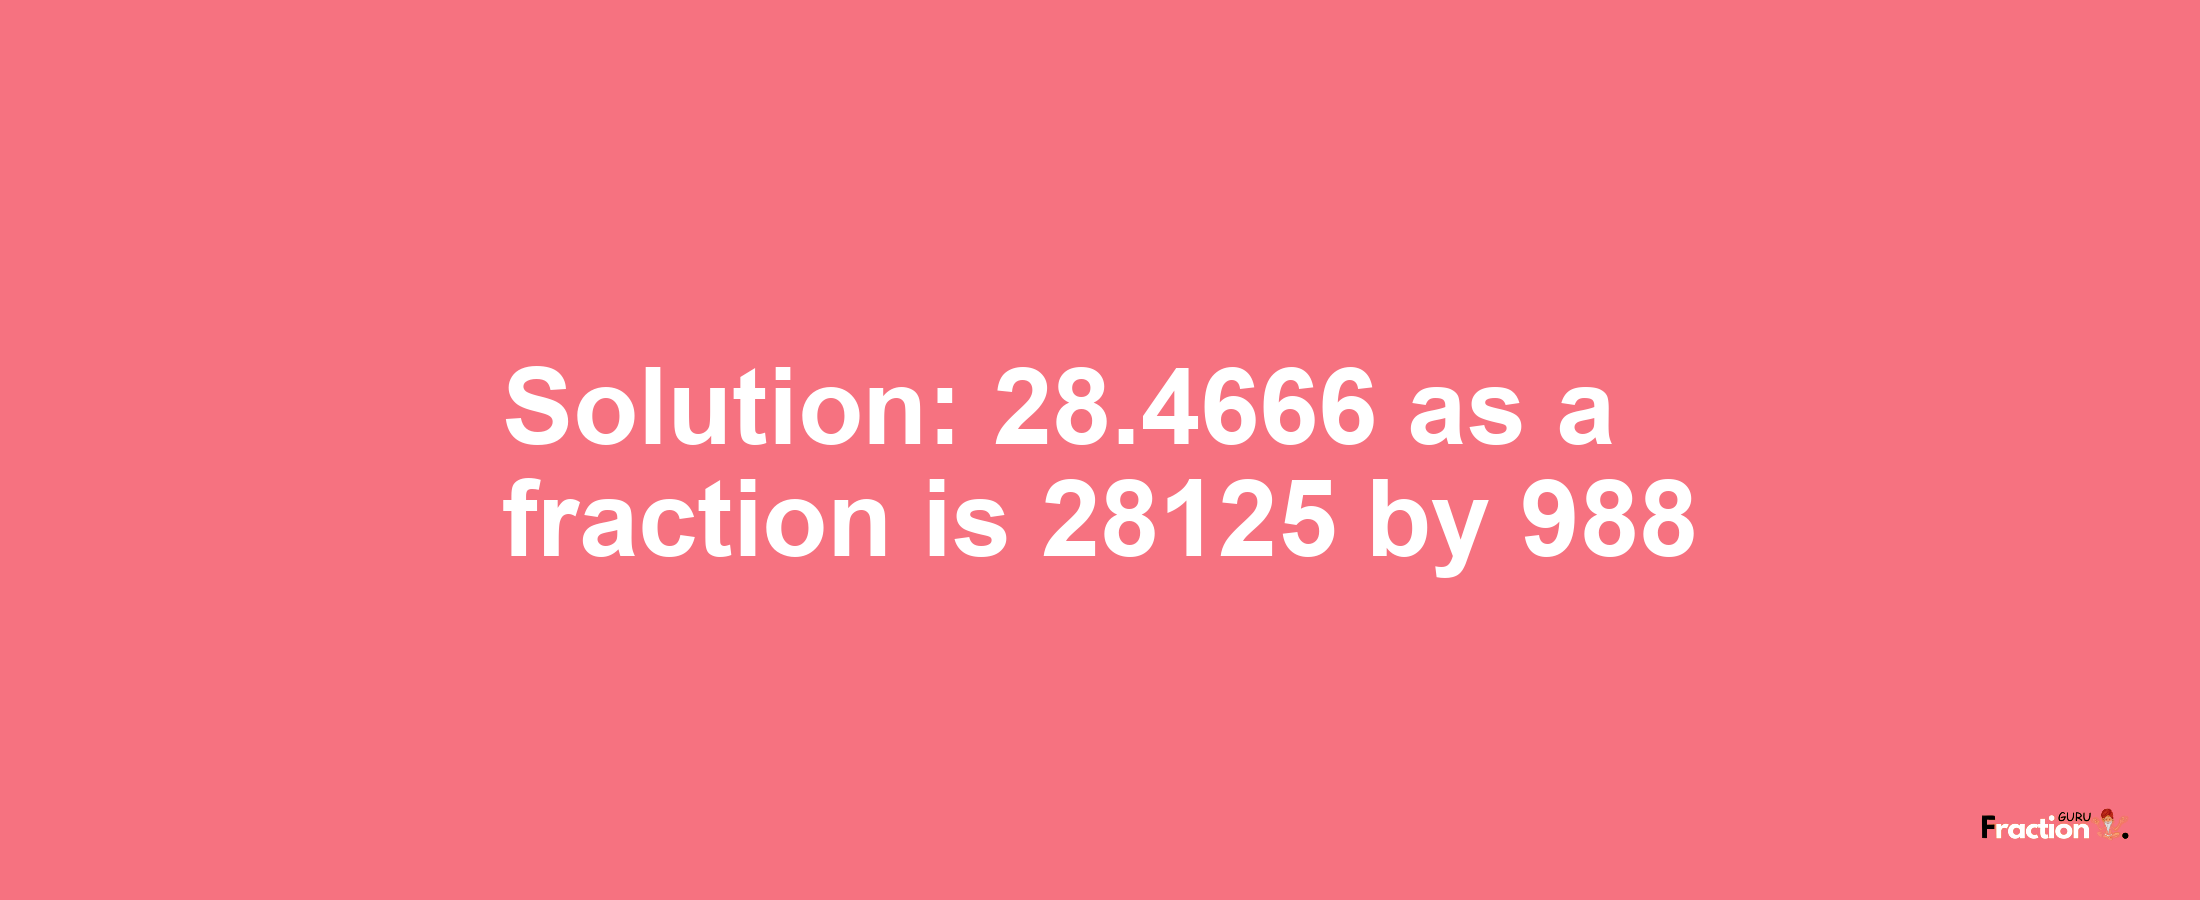 Solution:28.4666 as a fraction is 28125/988